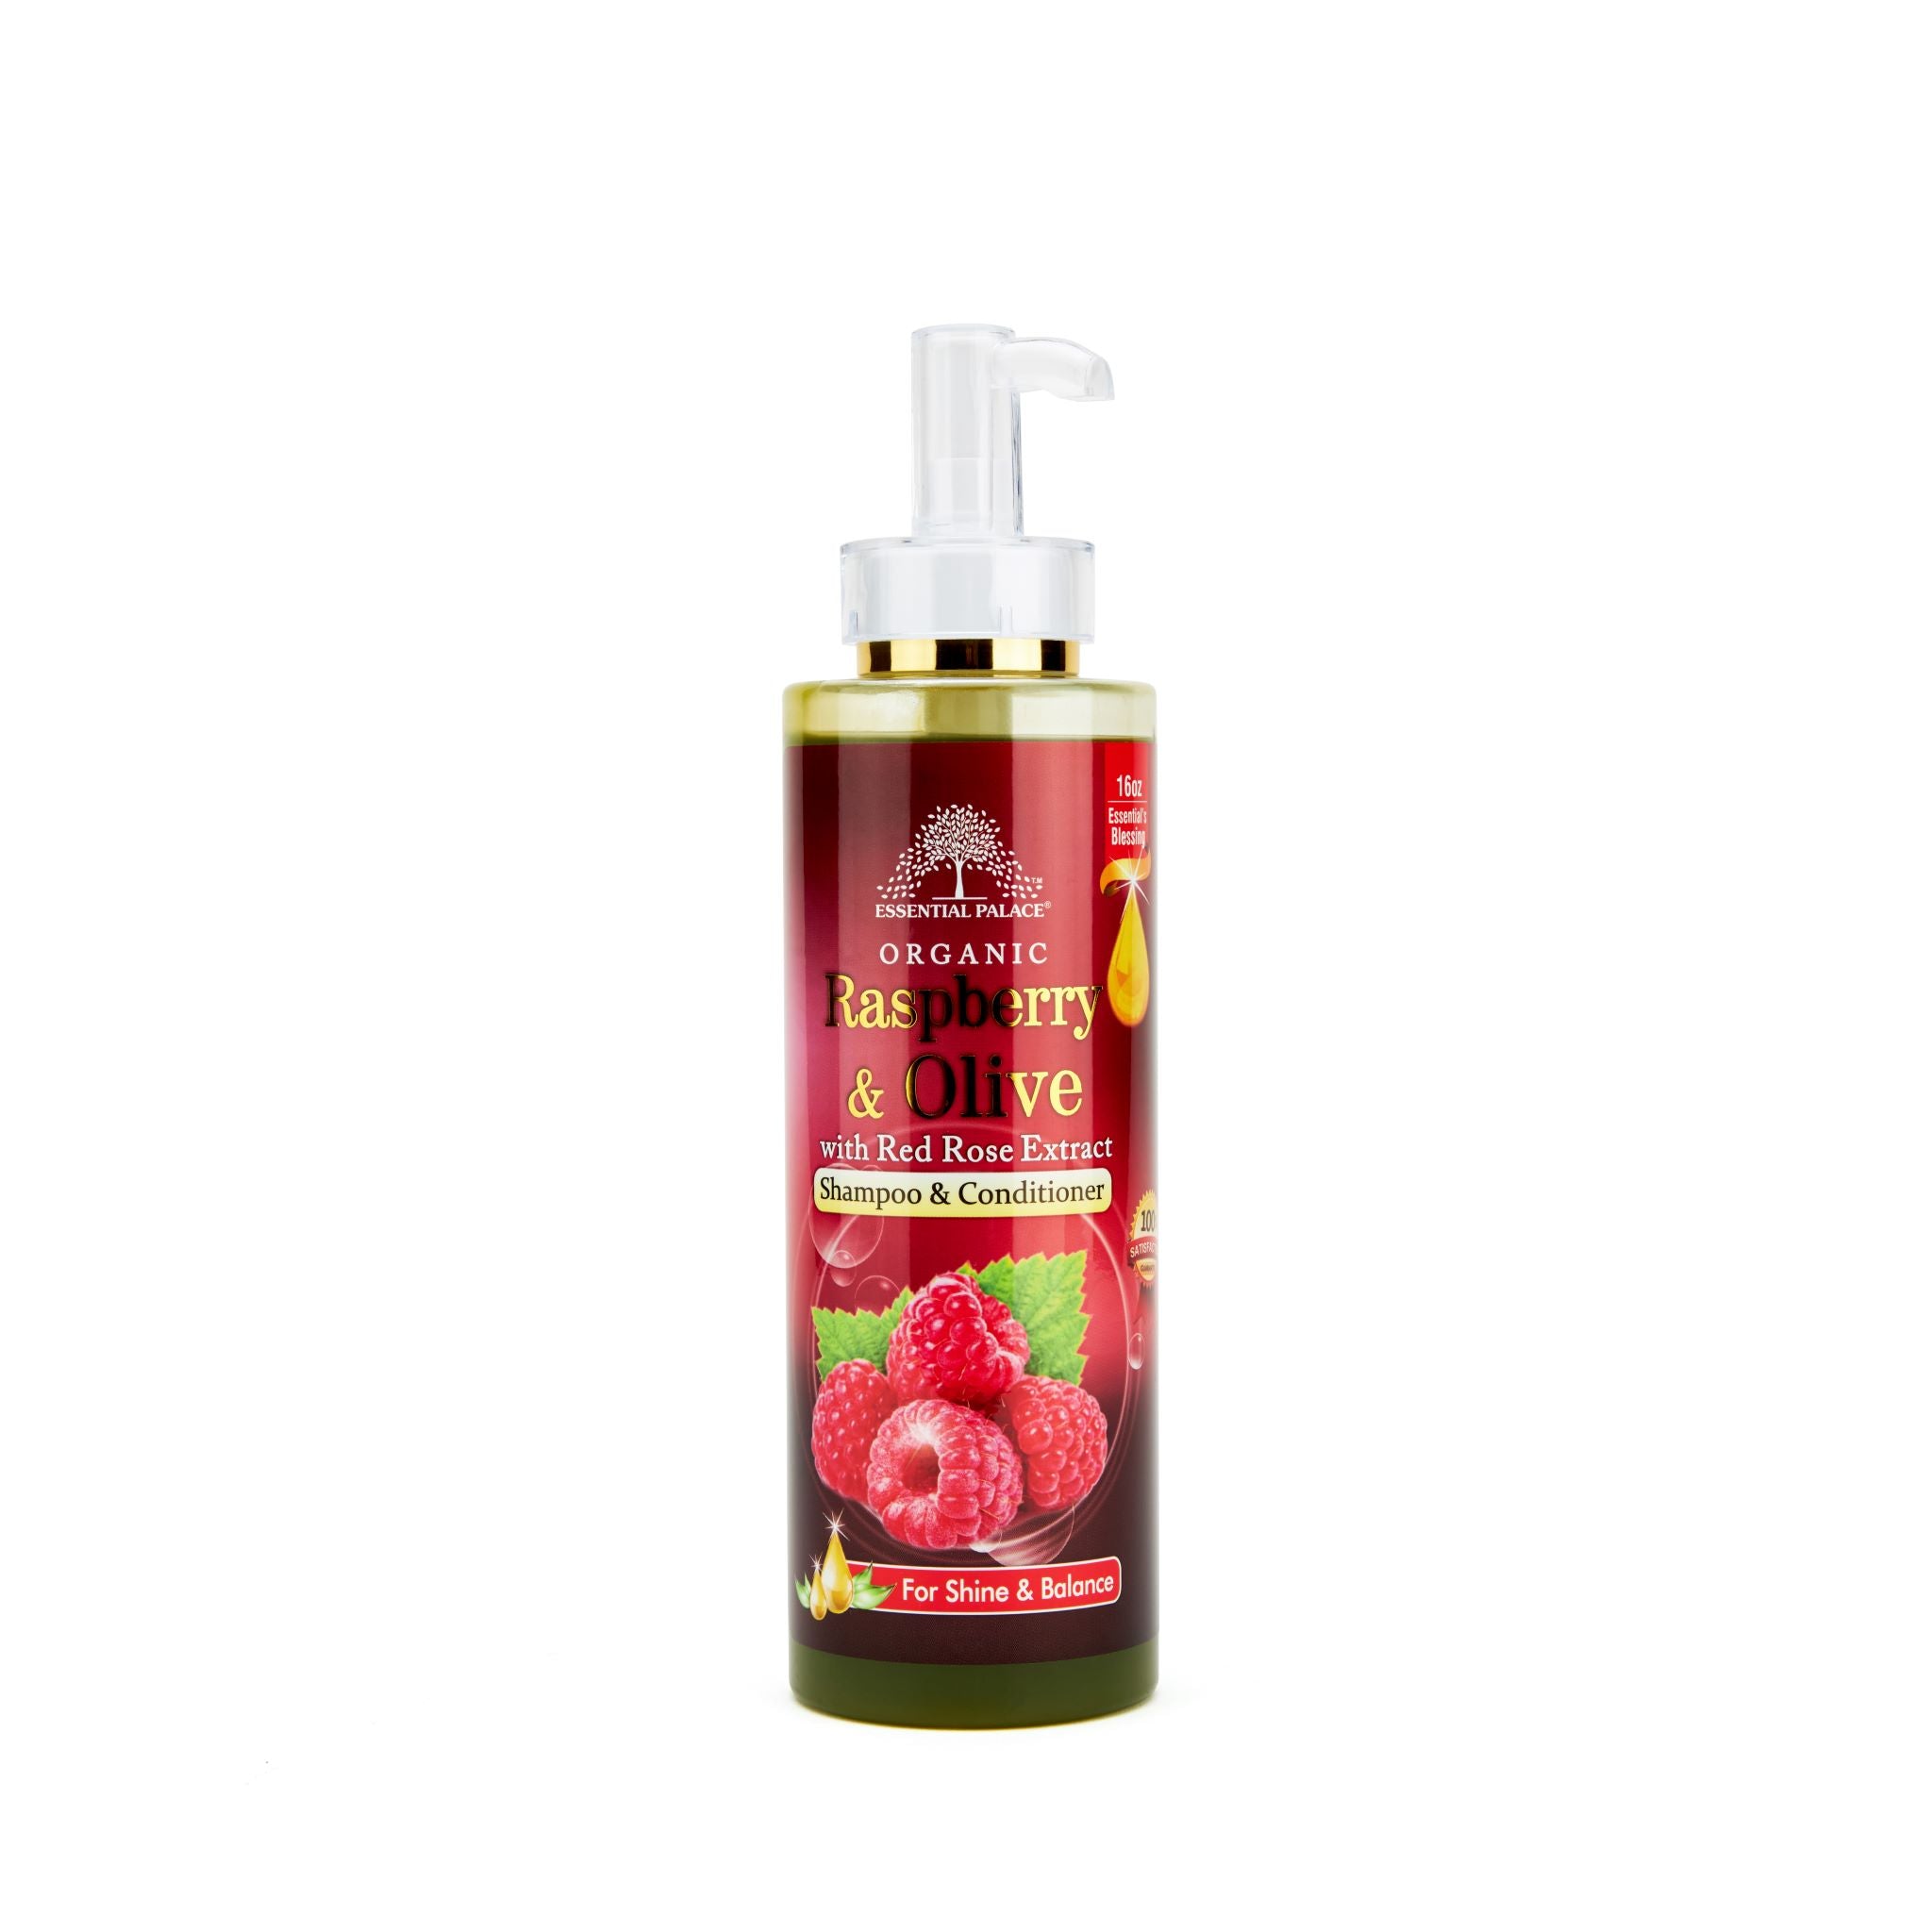 Essential Palace Raspberry and Olive Shampoo and Conditioner (2516099)